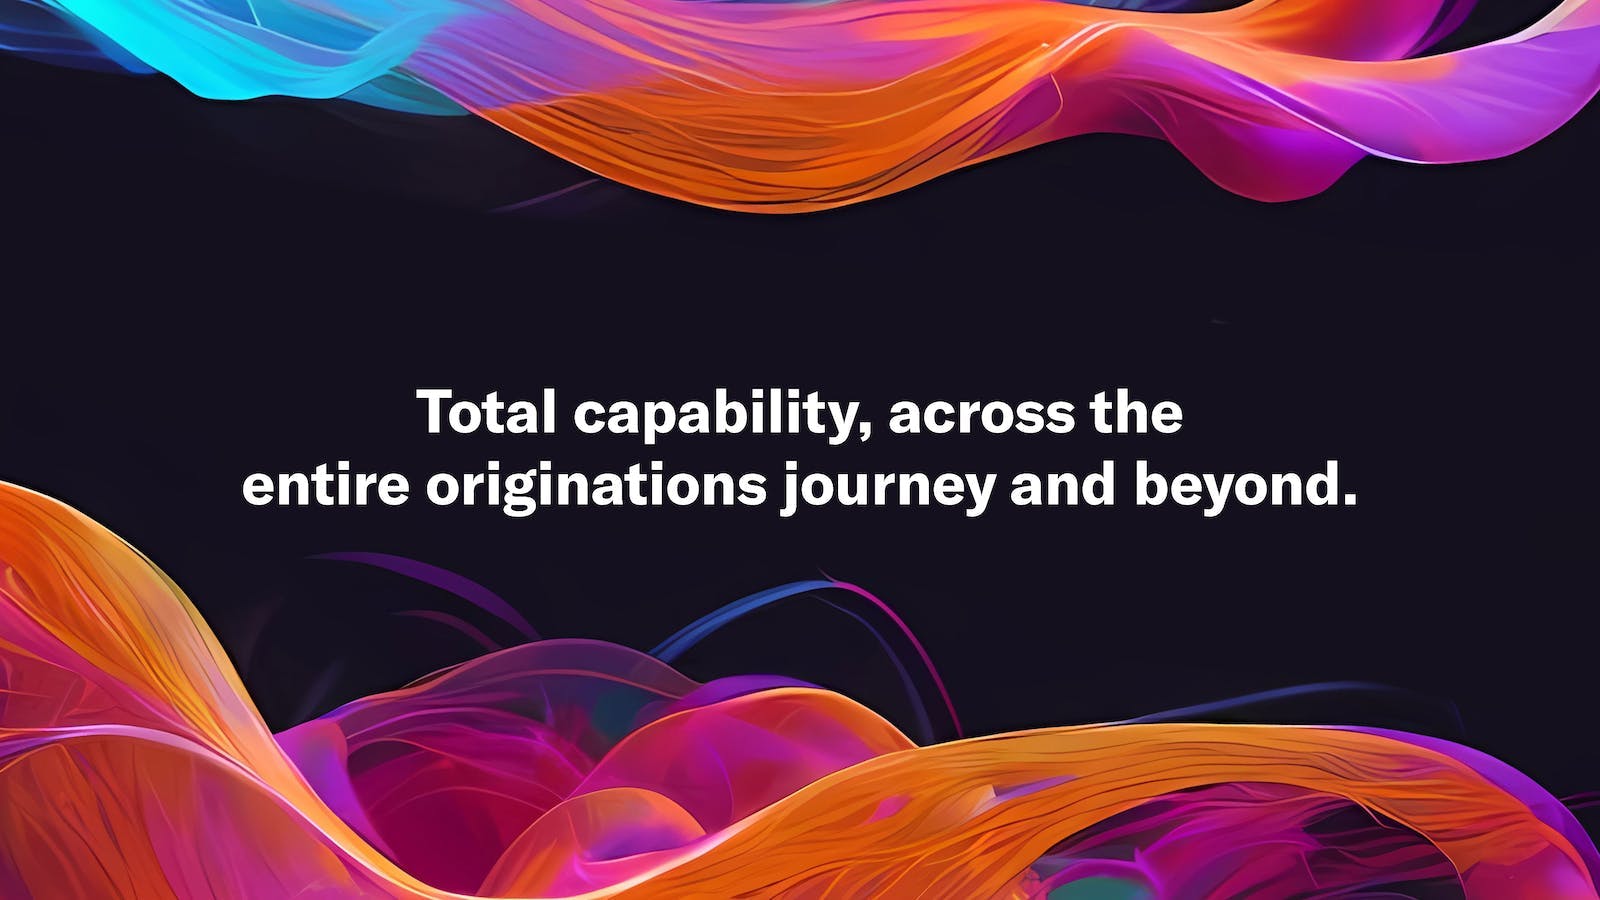 Graphic with the words "Total capability, across the entire originations journey and beyond."